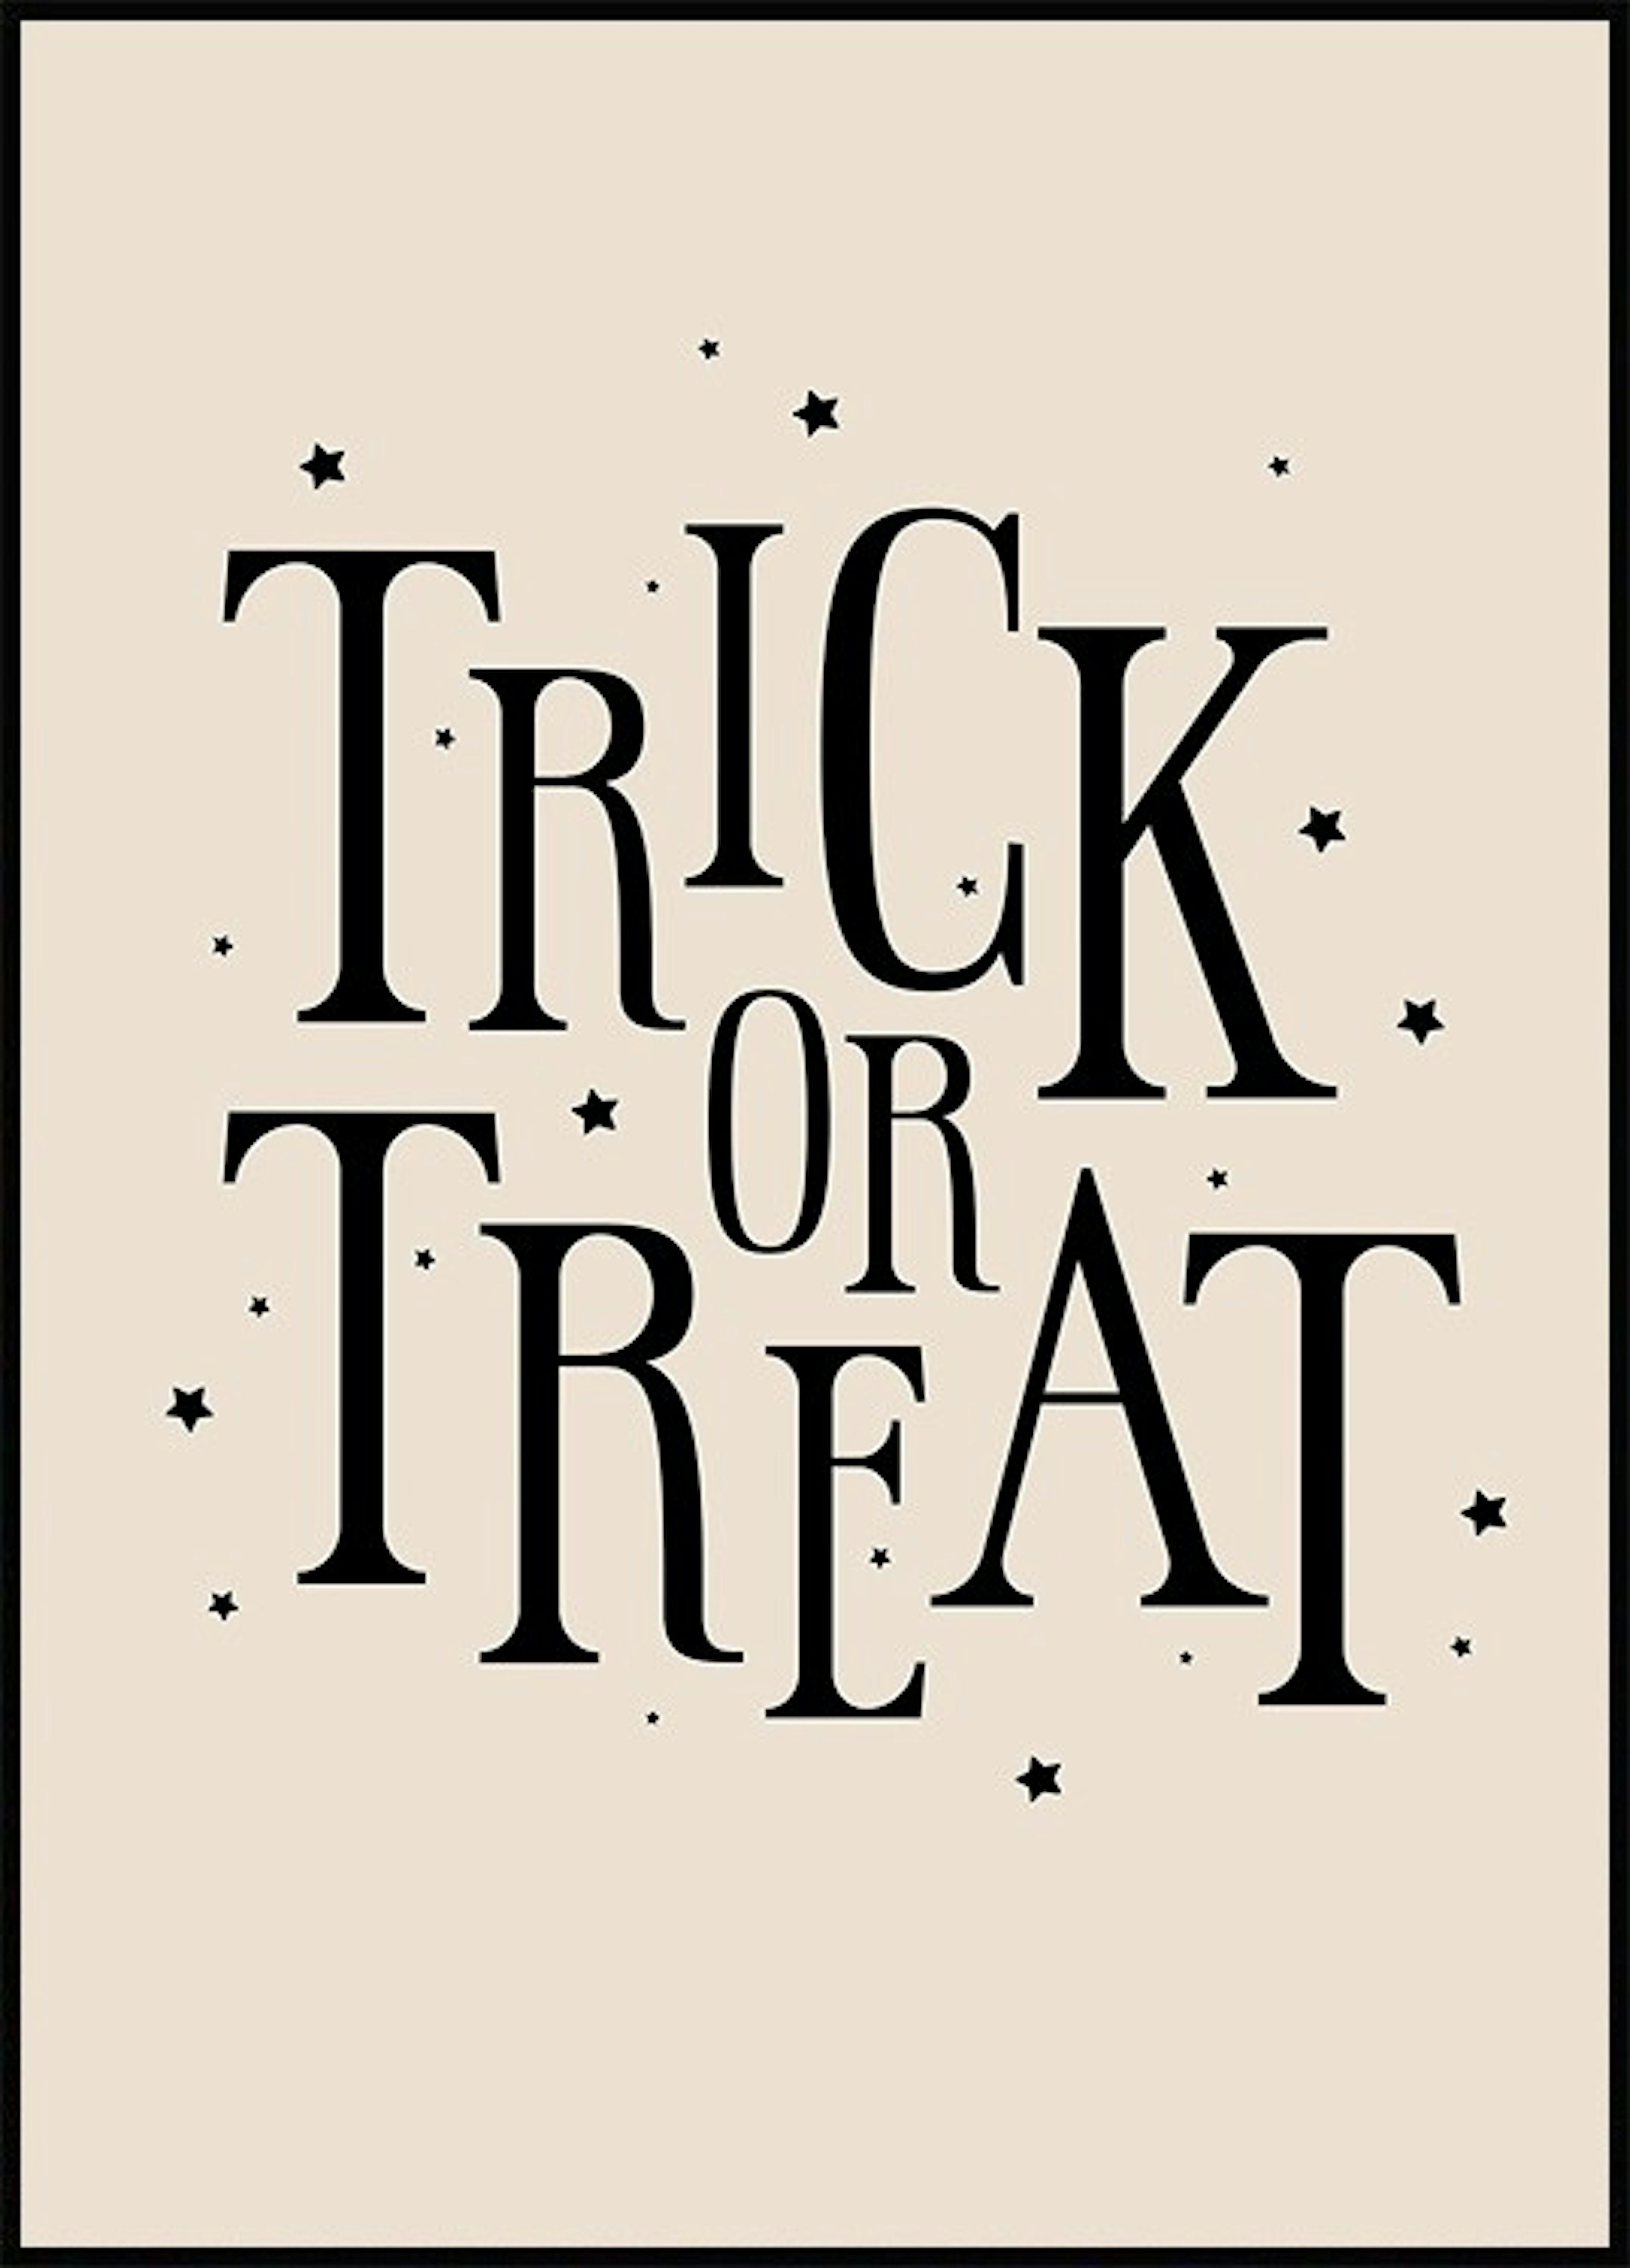 Trick or Treat Poster 0